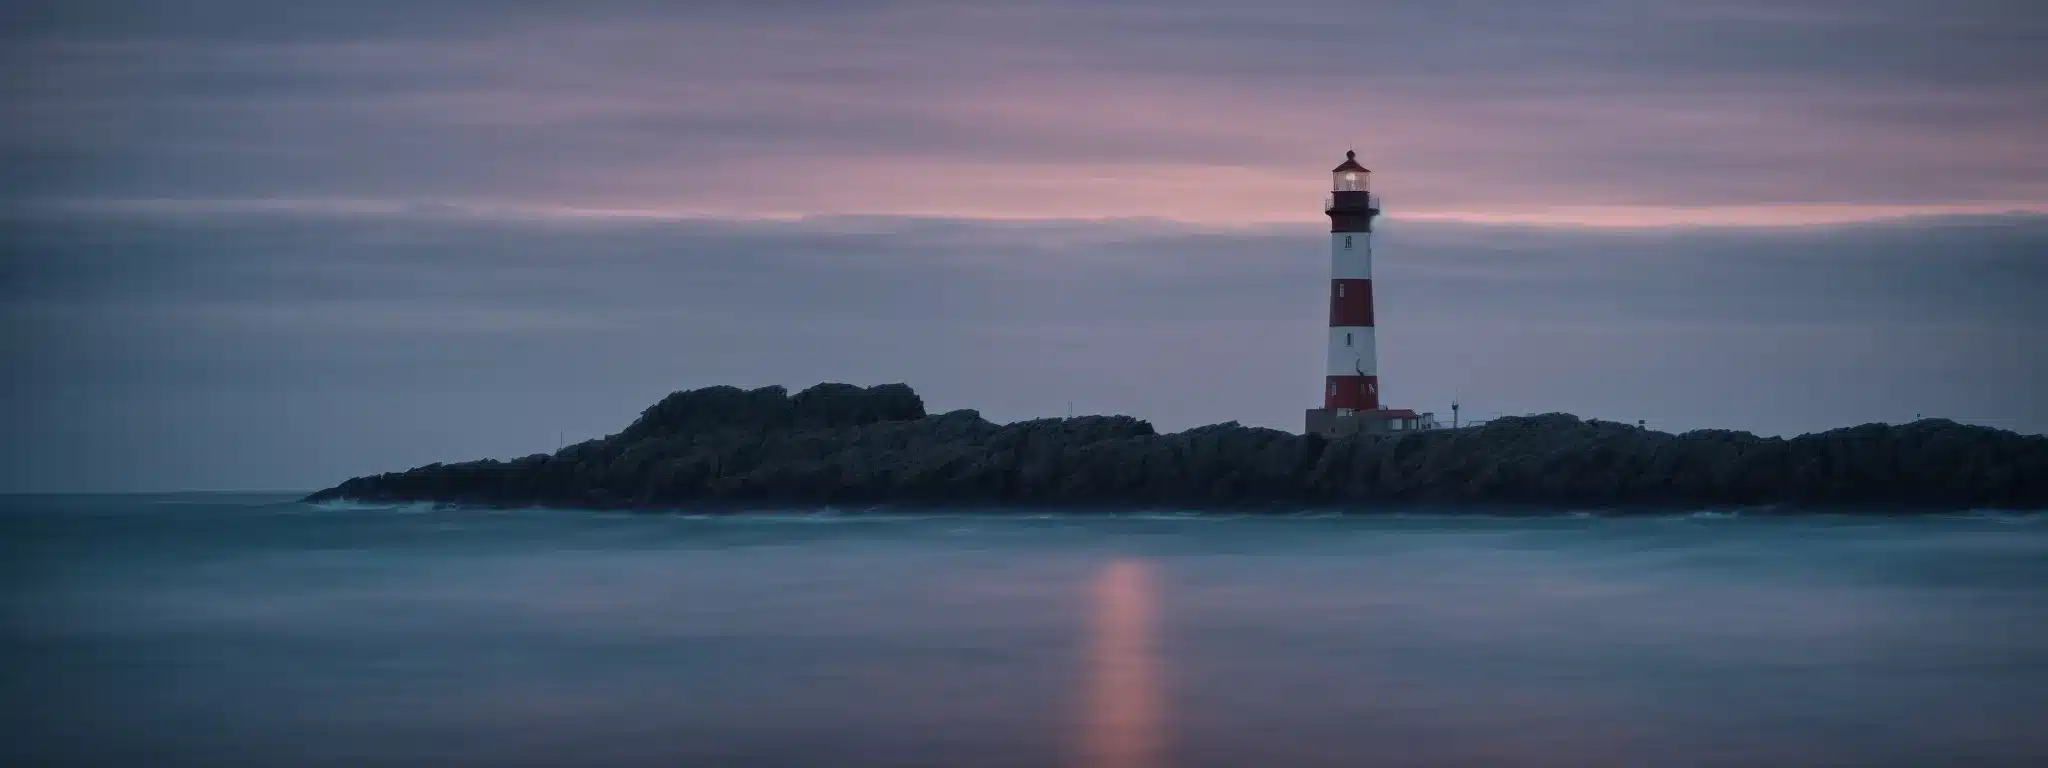 A Lighthouse Stands Tall Amidst A Tranquil Sea Under A Twilight Sky, Symbolizing Guidance And Vigilance In A Changing Landscape.